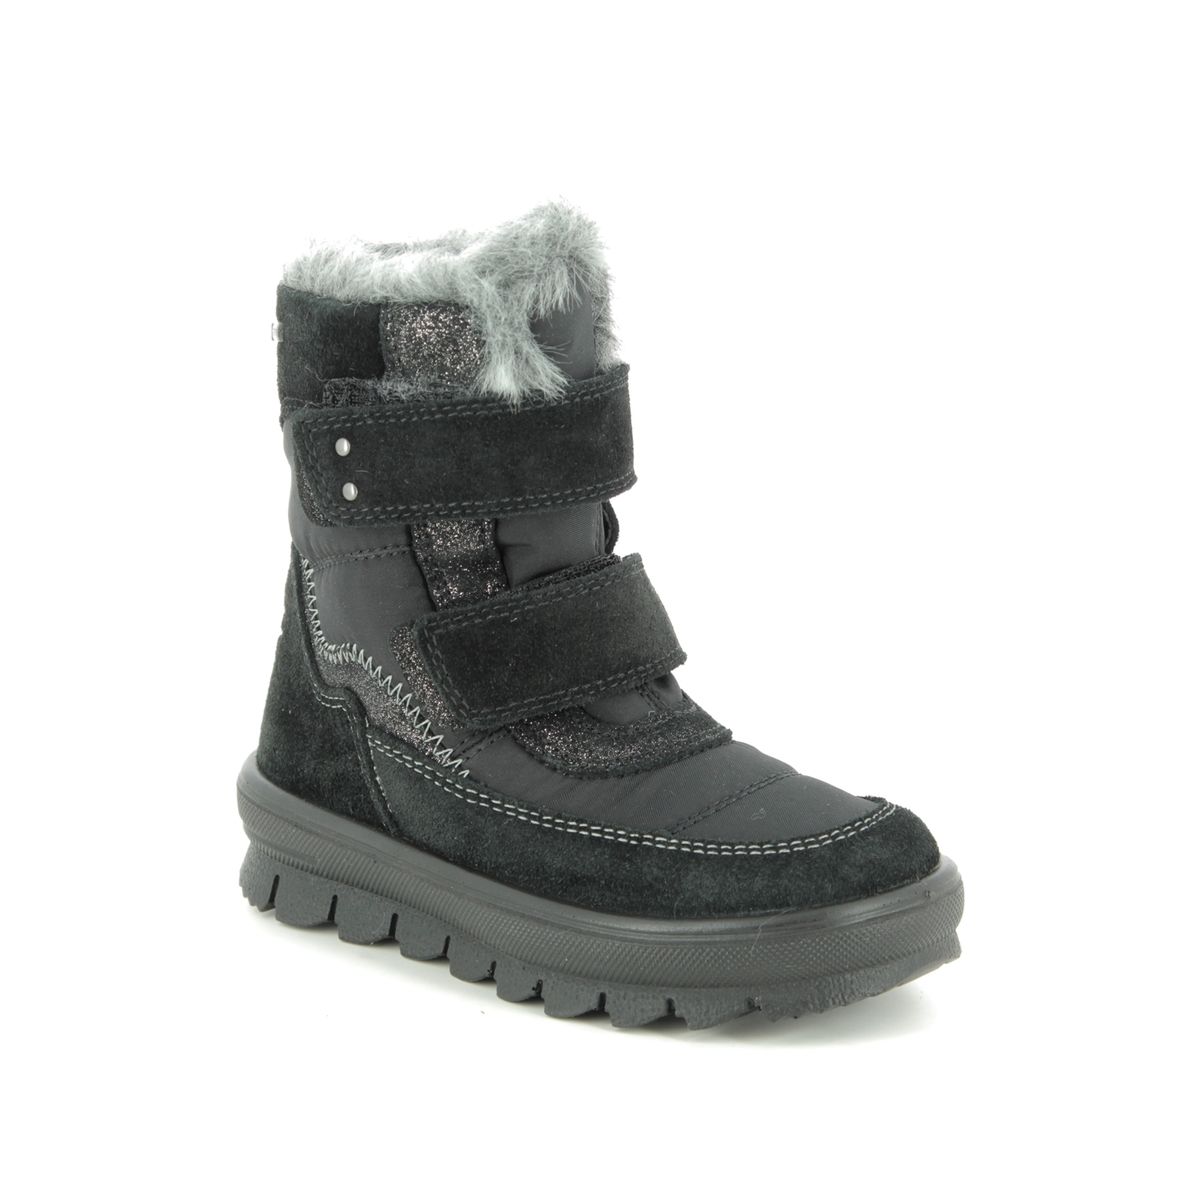 Superfit Flavia Vel Gtx Black Suede Kids Toddler Girls Boots 09214-00 In Size 26 In Plain Black Suede For kids